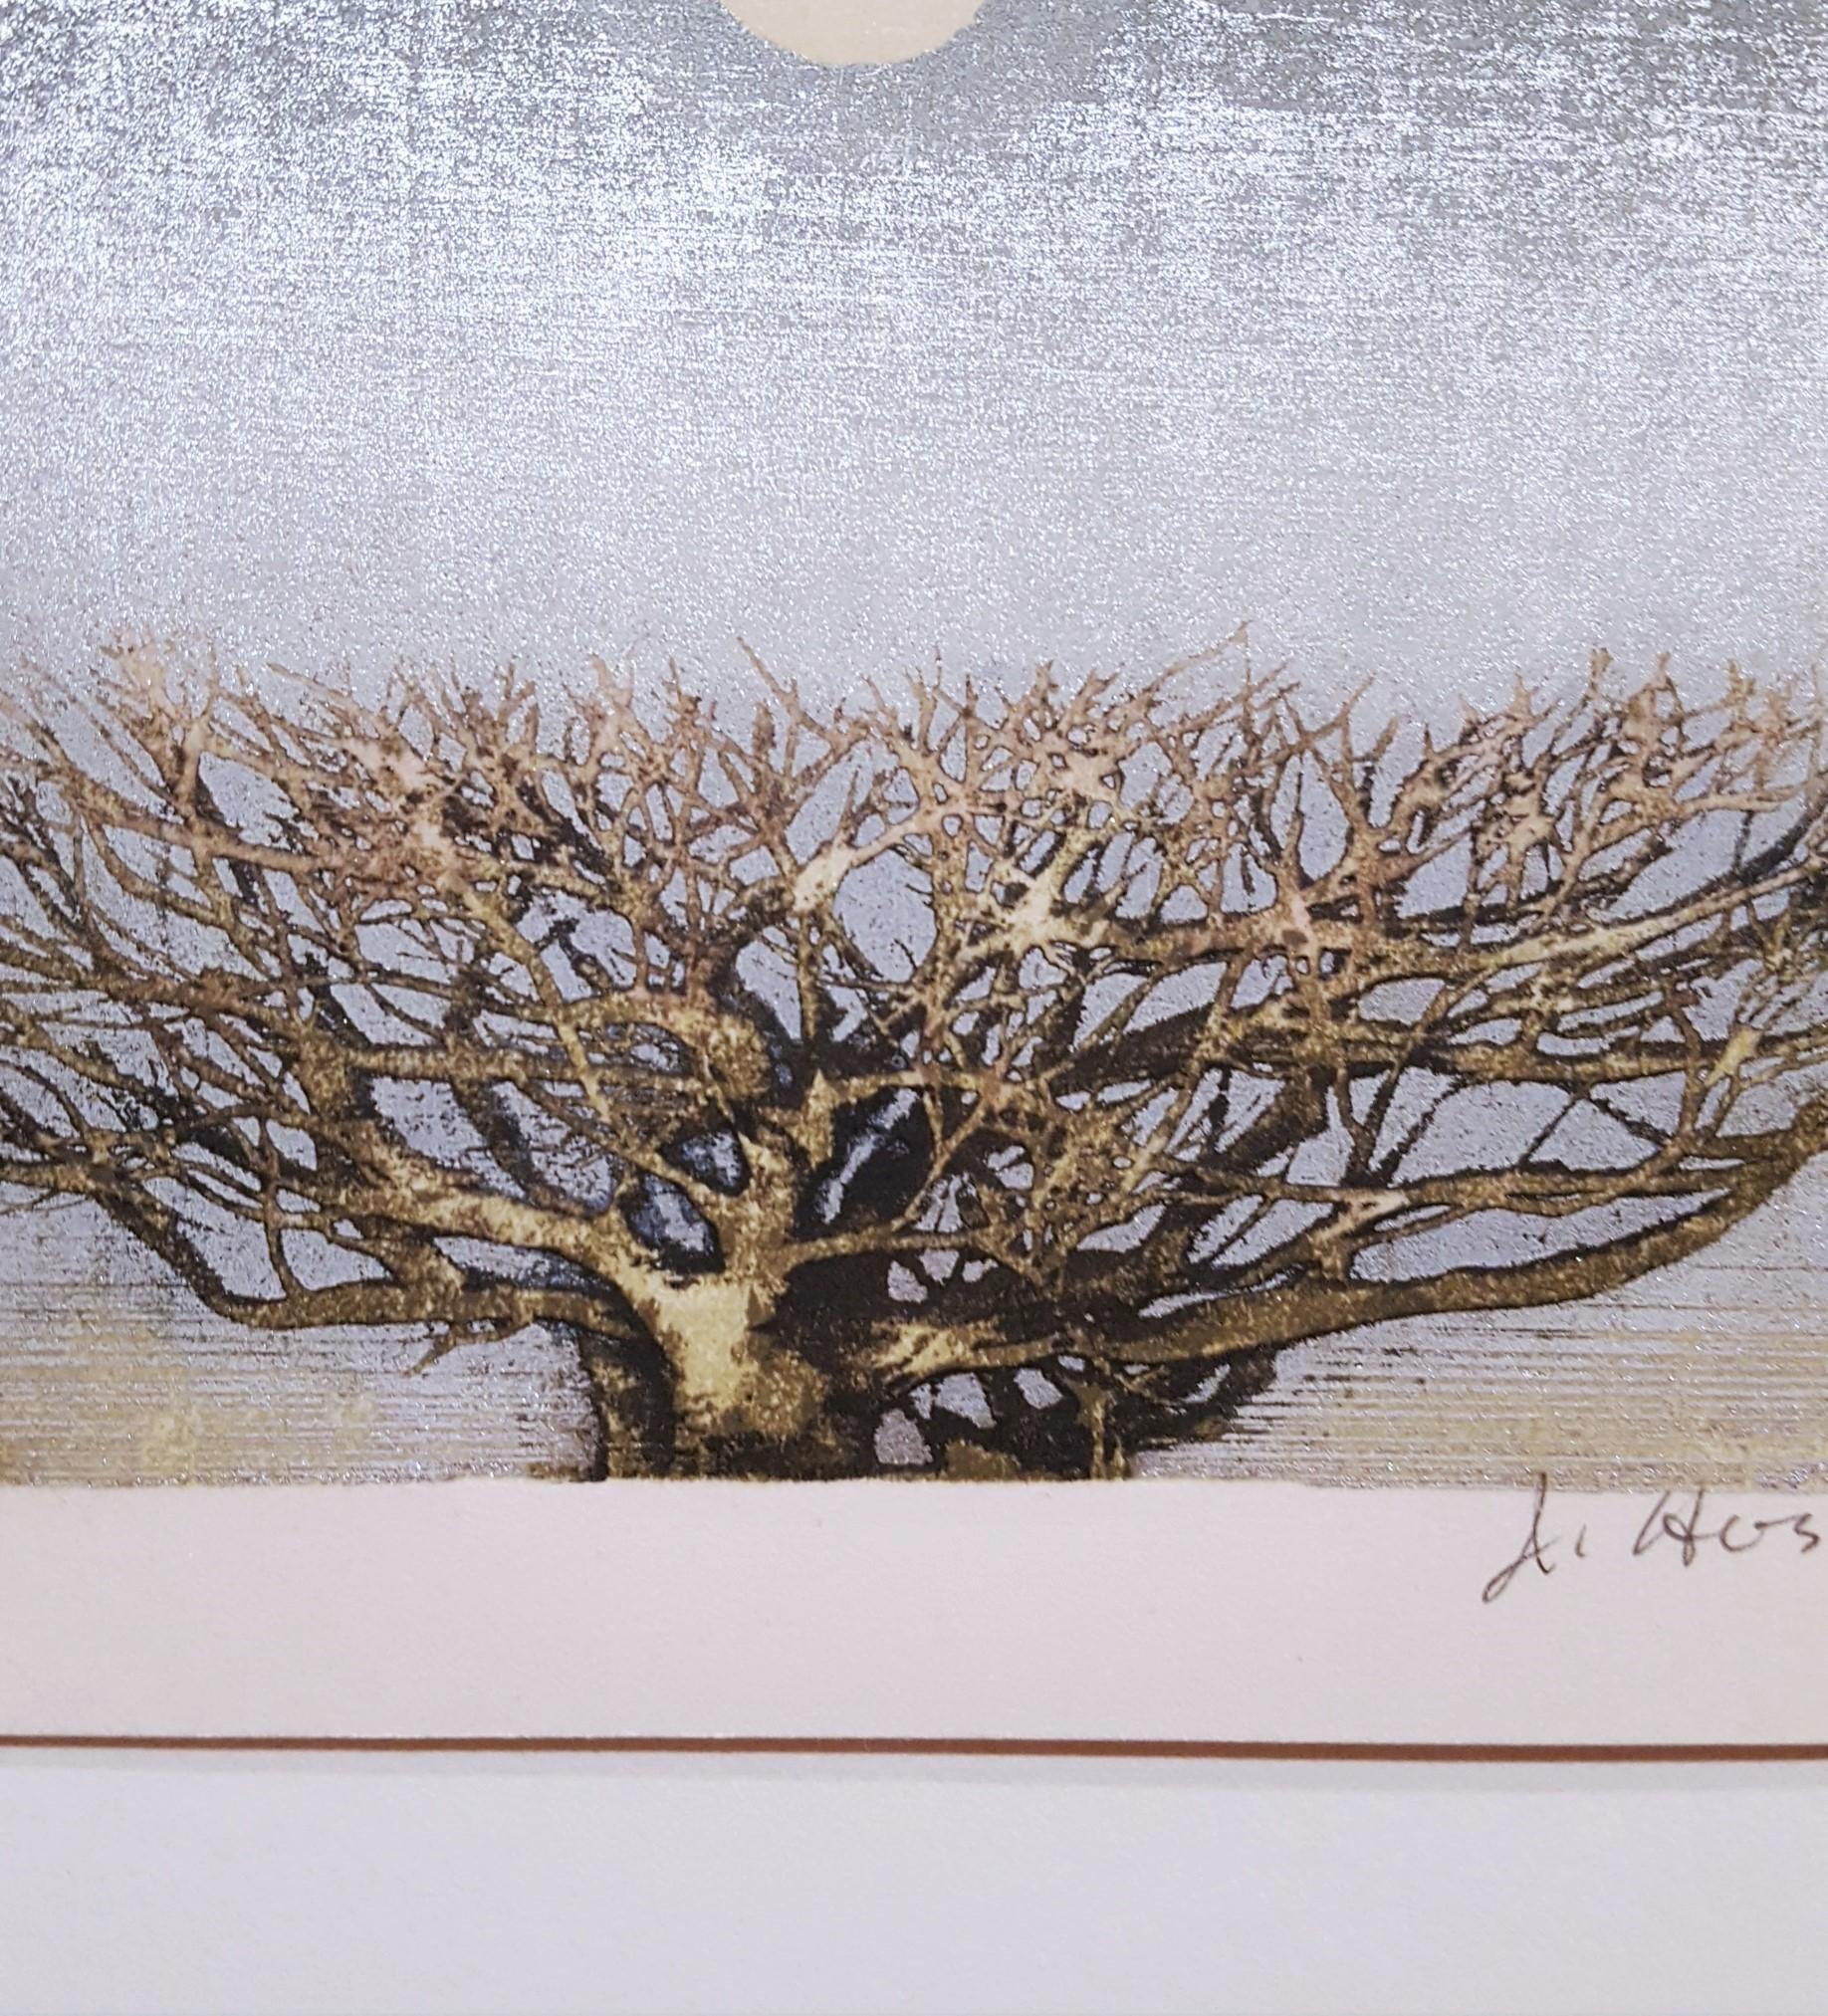 An original signed woodblock engraving with gold leaf on wove paper by Japanese artist Joichi Hoshi (1913-1979) titled 